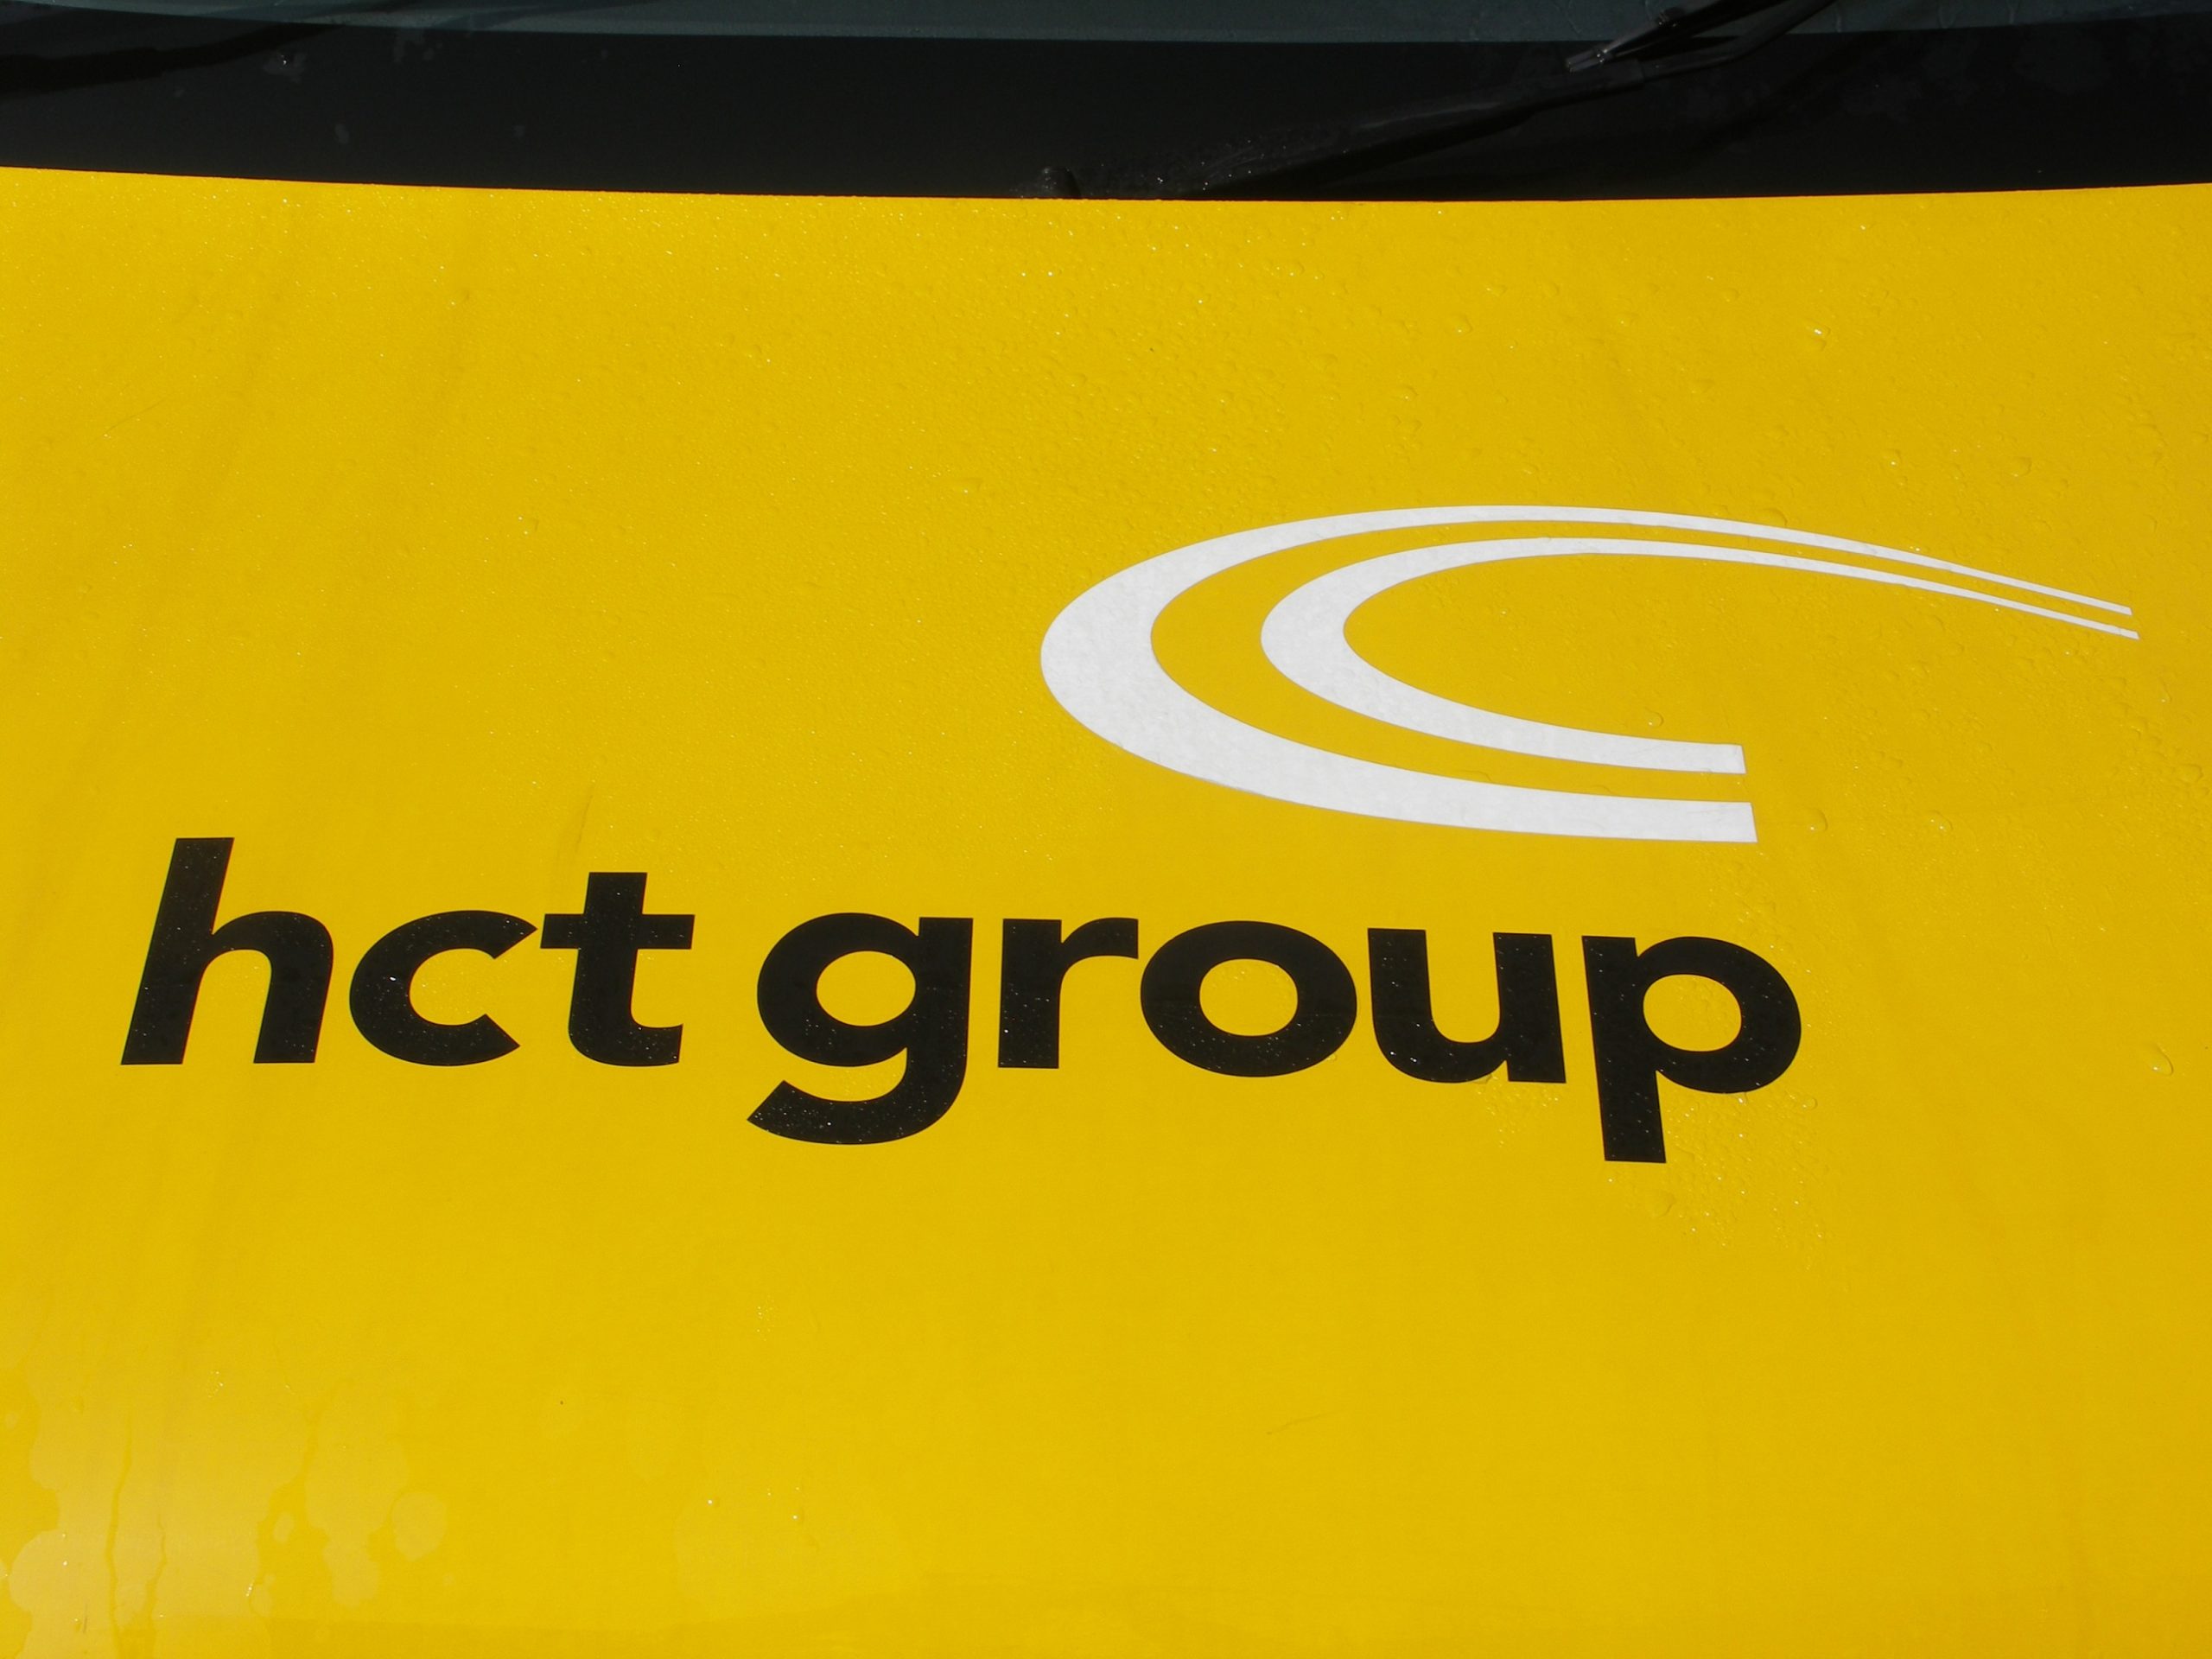 HCT Group enters administration and ceases trading